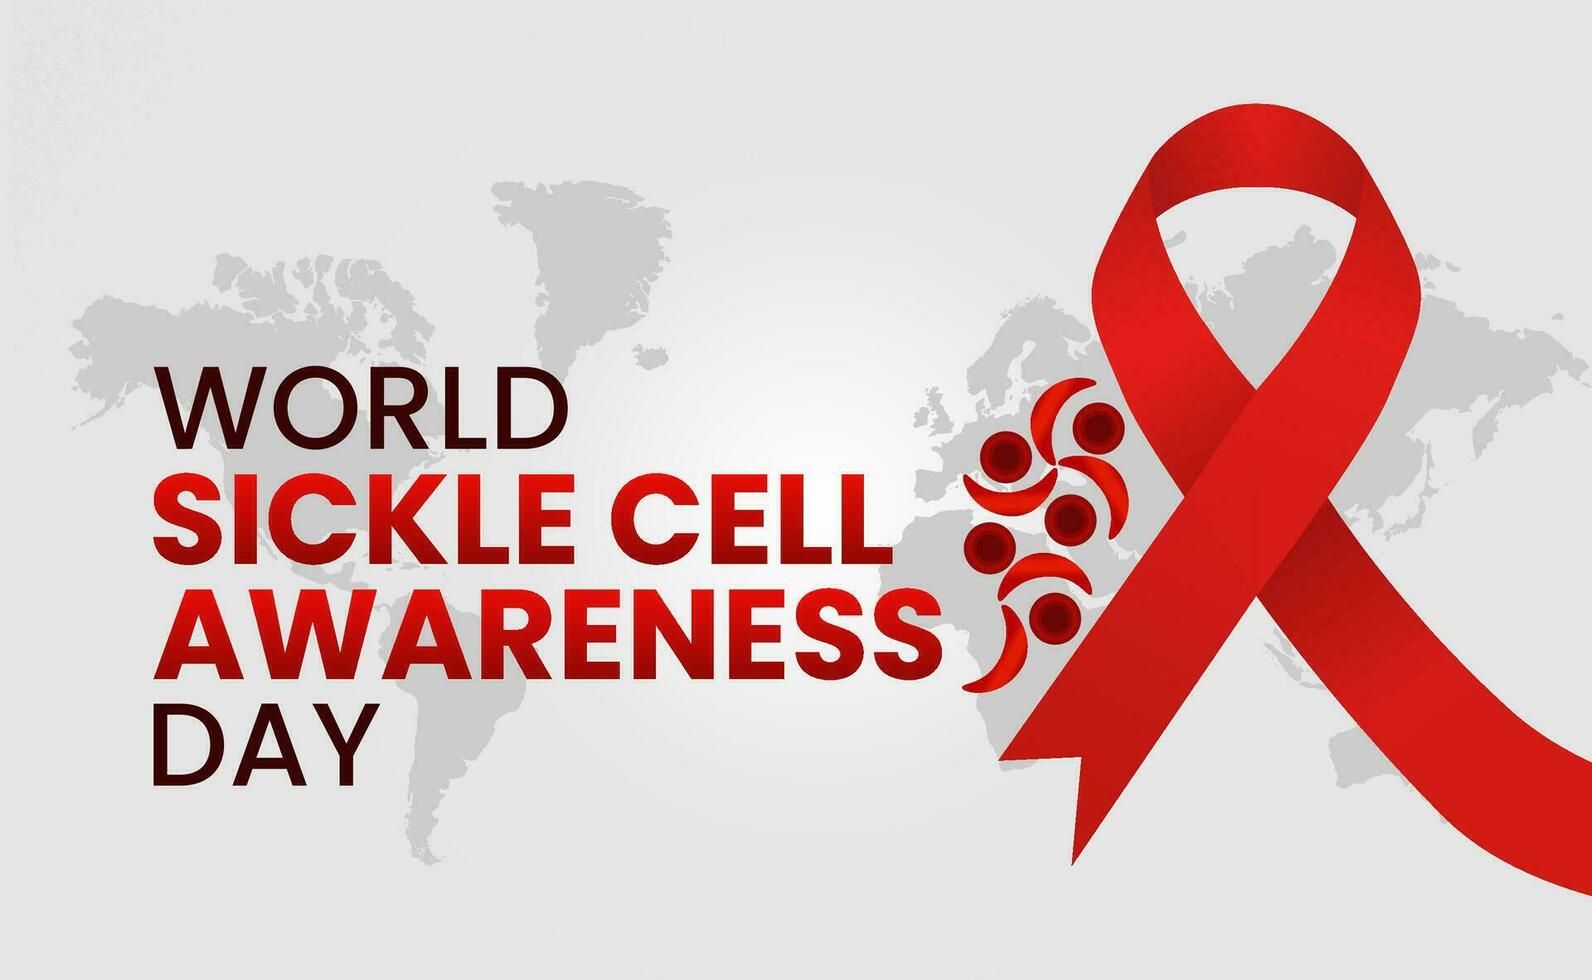 vector graphic of world sickle cell awareness day good for world sickle cell awareness day celebration. poster, banner. flat design .flat illustration